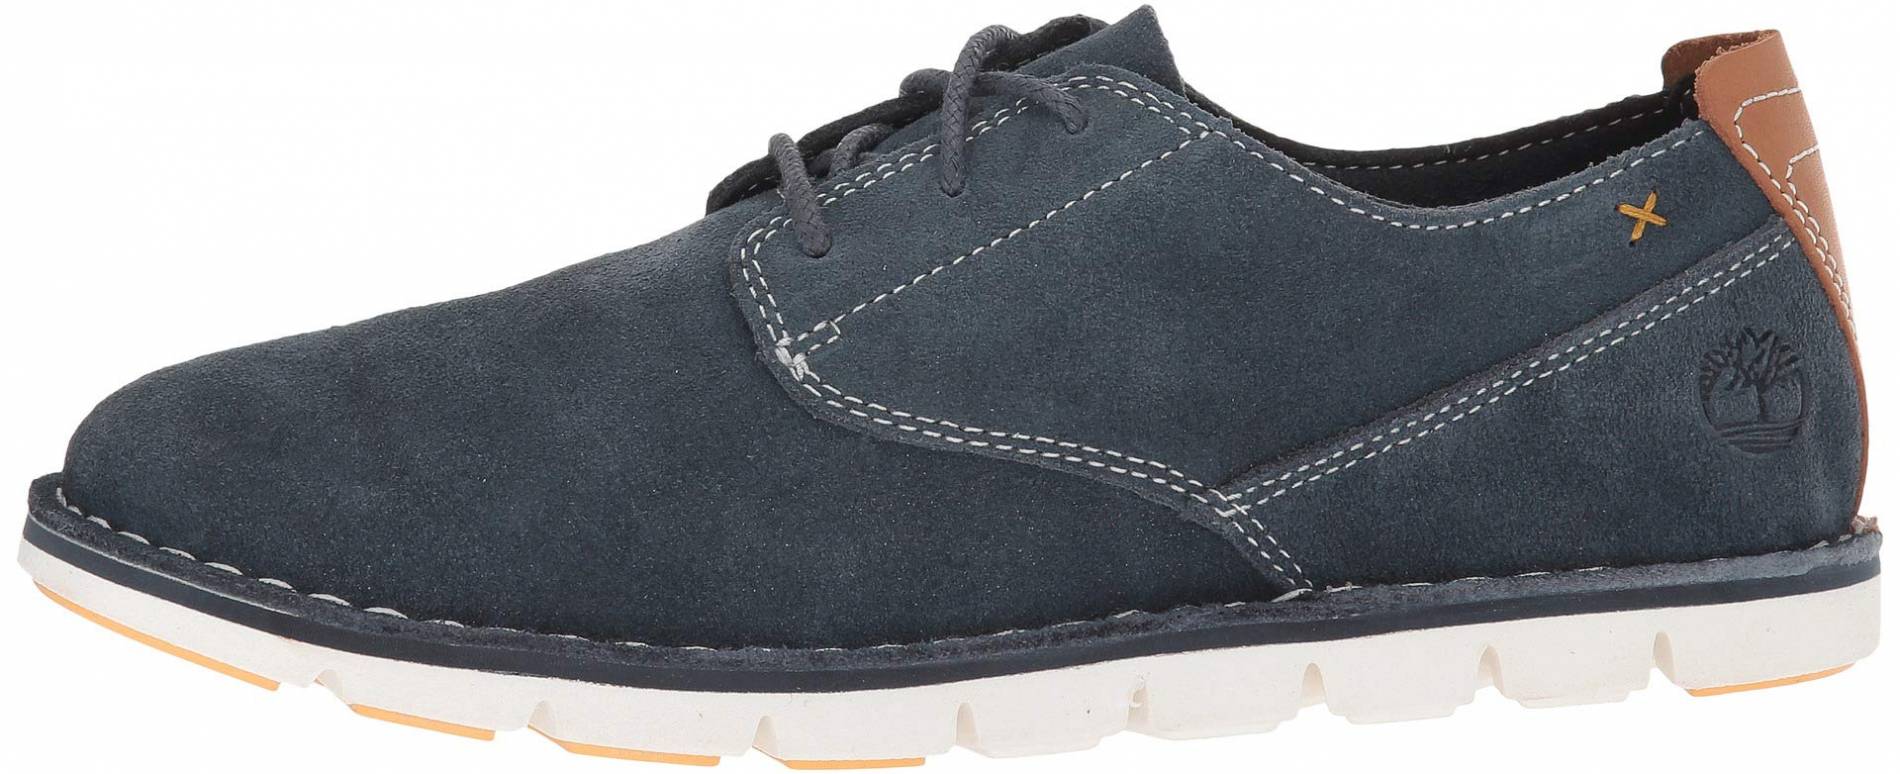 oxford suede shoes